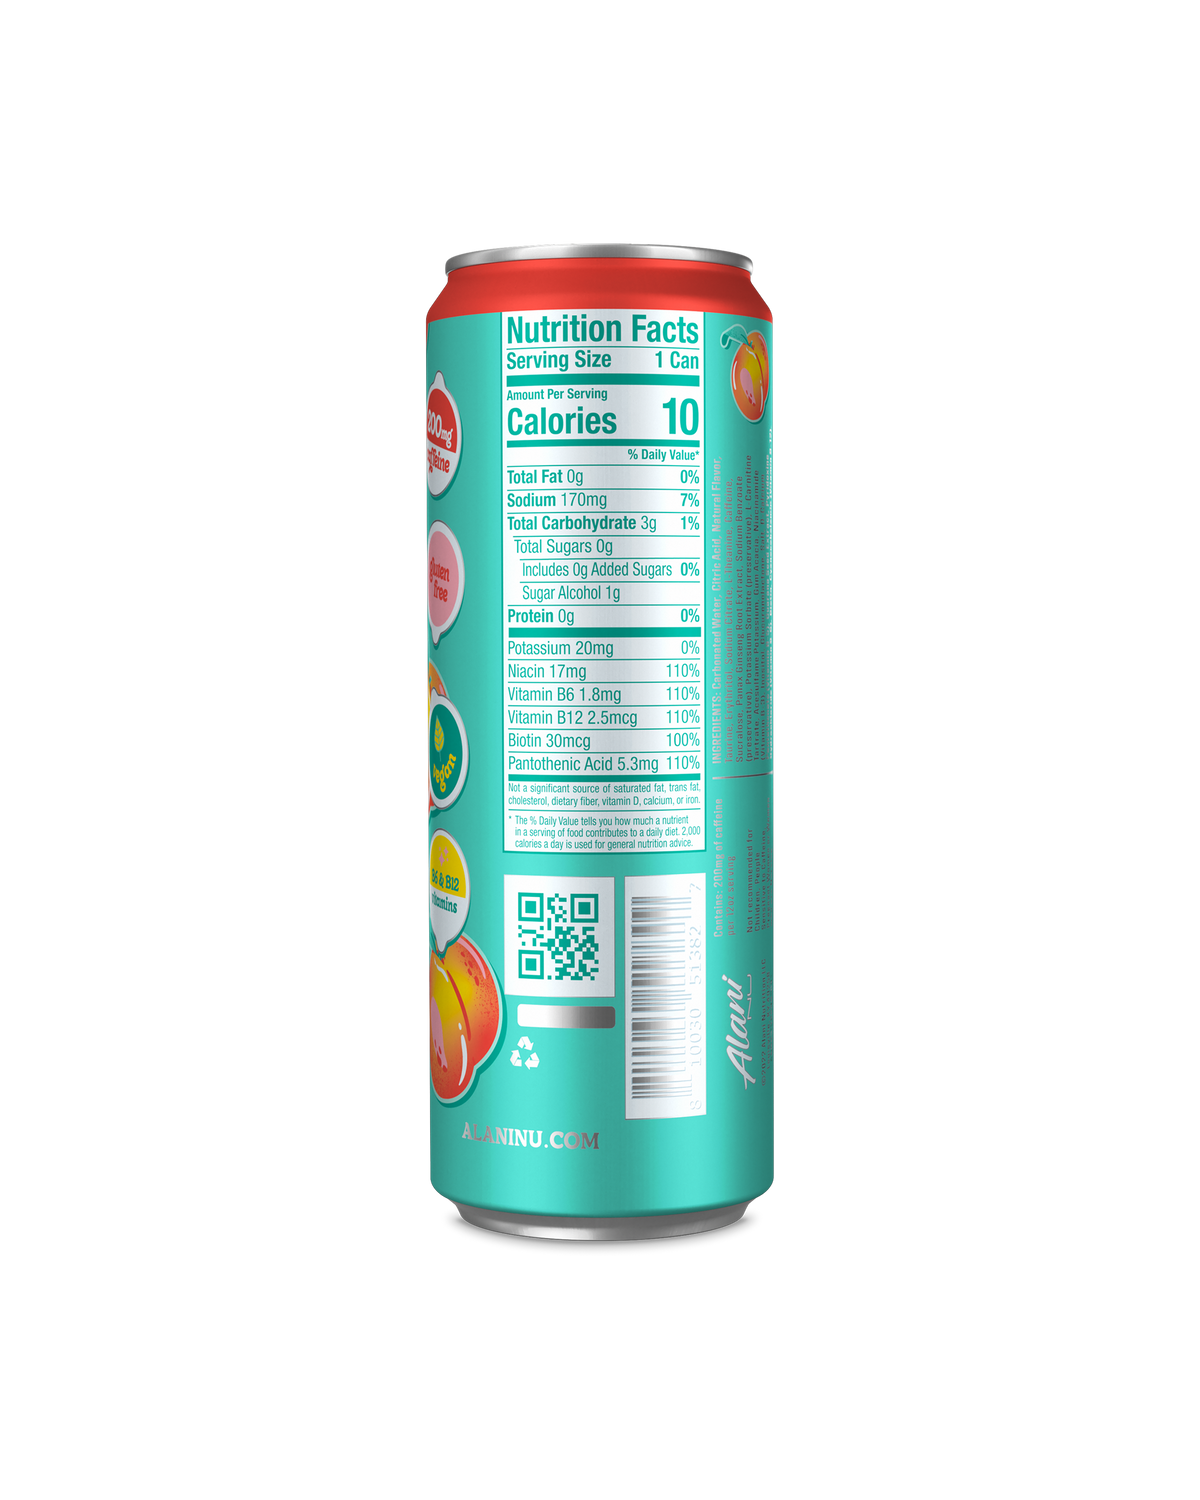 A back view of Energy Drink in Juicy Peach flavor highlighting nutrition facts.